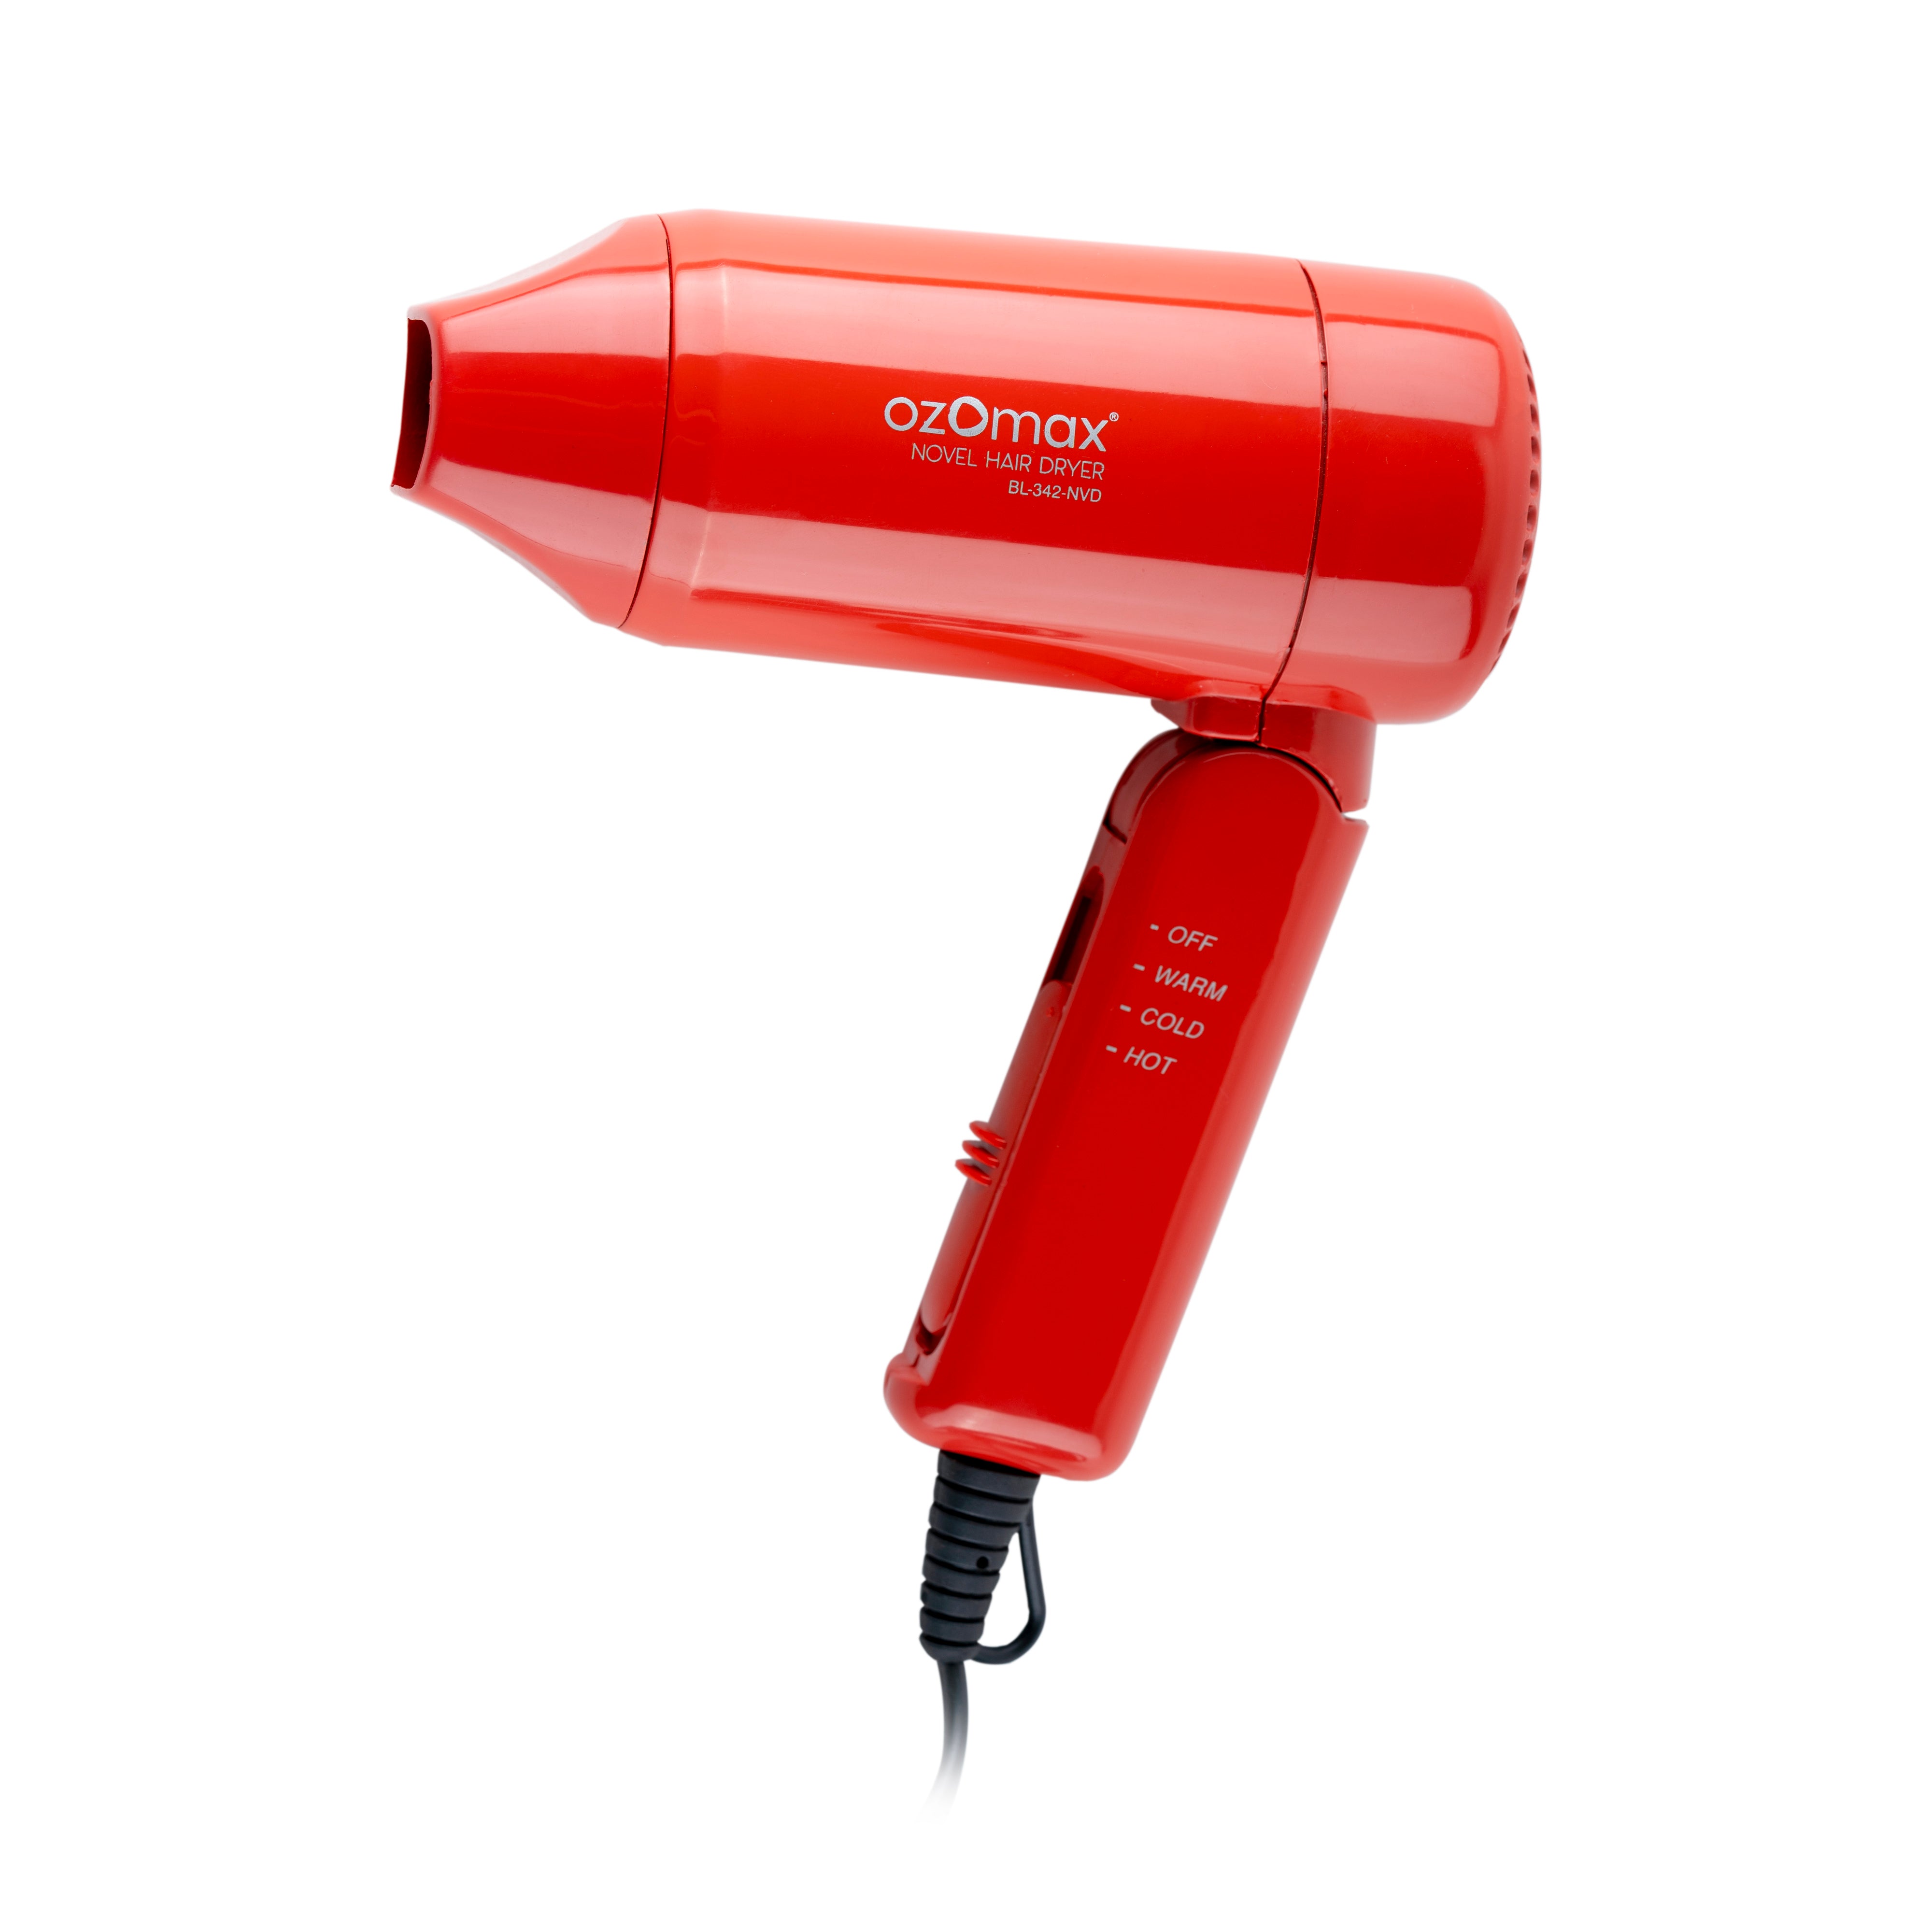 2021 Lowest Price Syska Trendsetter Hd1010 Hair Dryer 1000 W Pink Price  in India  Specifications